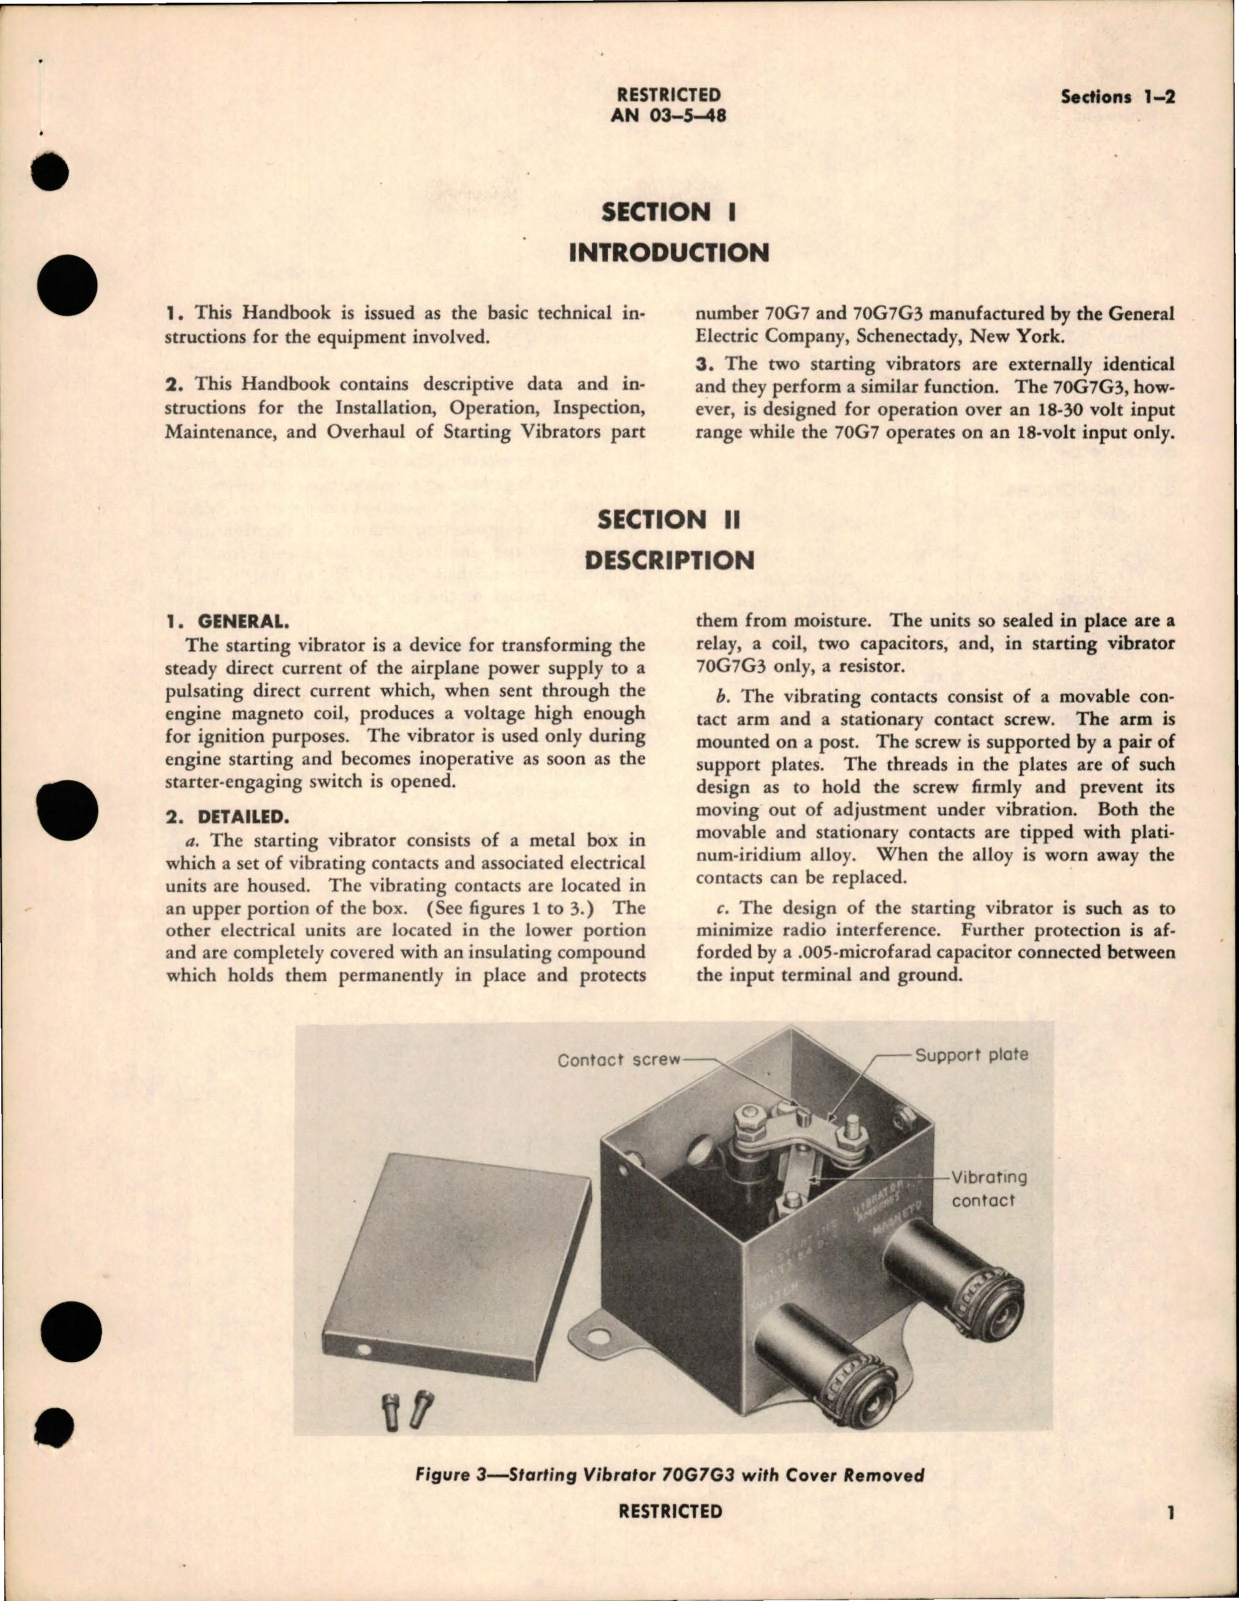 Sample page 5 from AirCorps Library document: Instructions with Parts Catalog for Starting Vibrators - Parts 70G7 and 70G7G3 